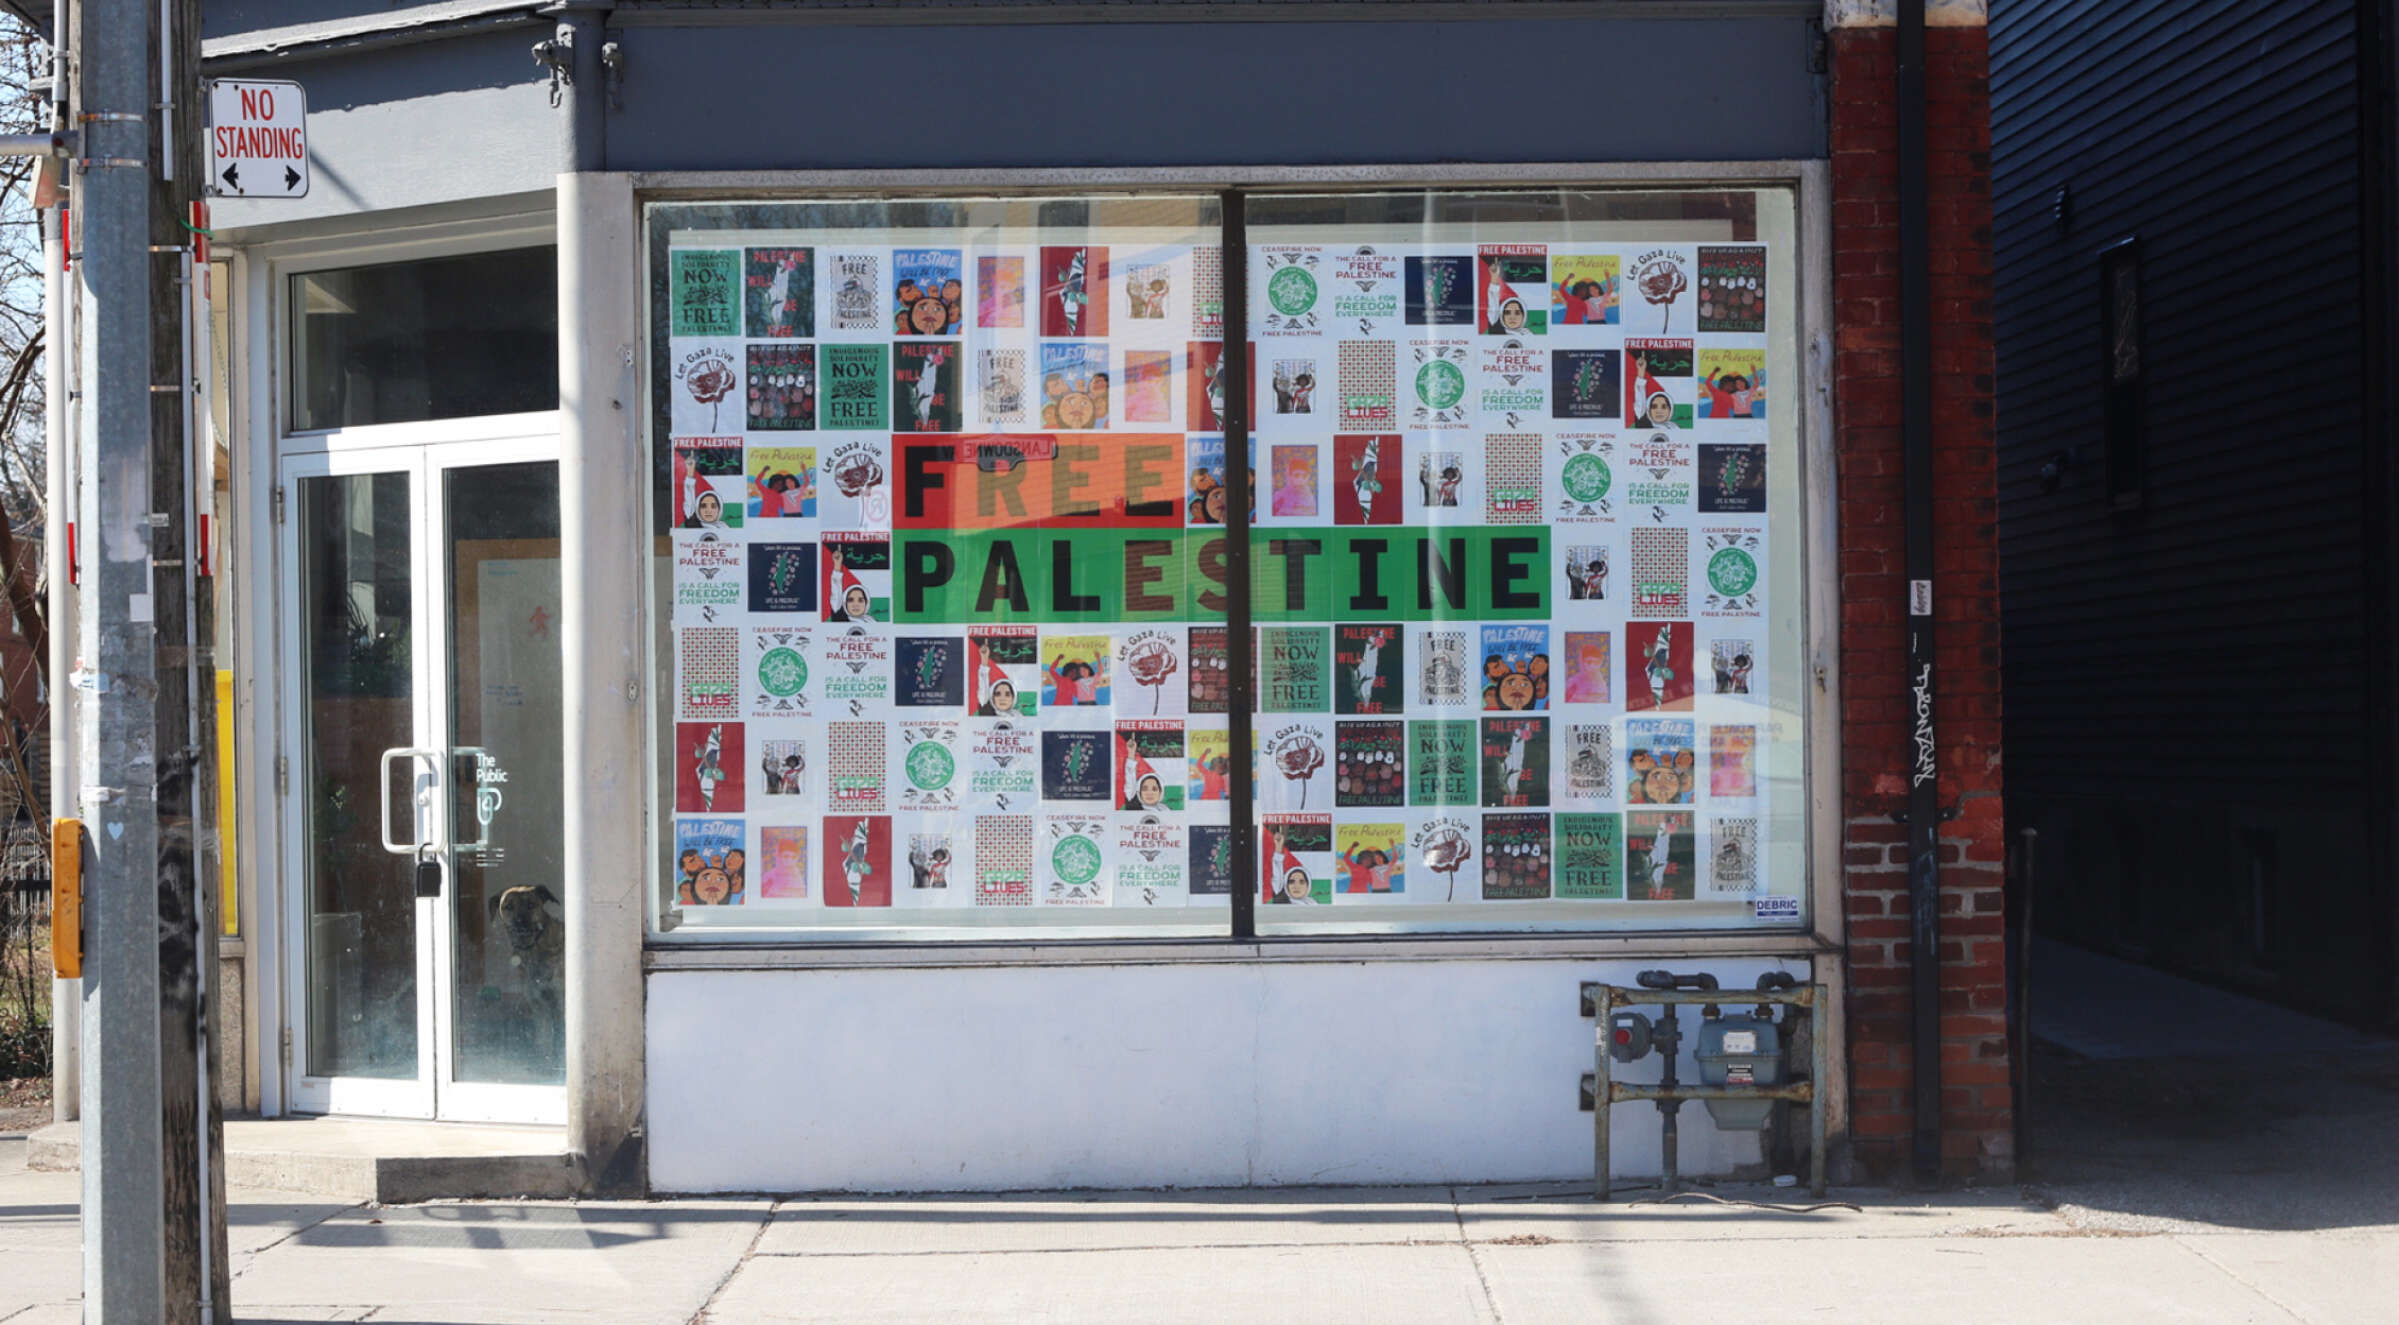 A storefront with large windows displaying numerous posters advocating for Palestinian rights. The phrase "FREE PALESTINE" is prominently featured in bold letters across multiple posters in the window. A street sign indicating "No Standing" stands nearby on the sidewalk.